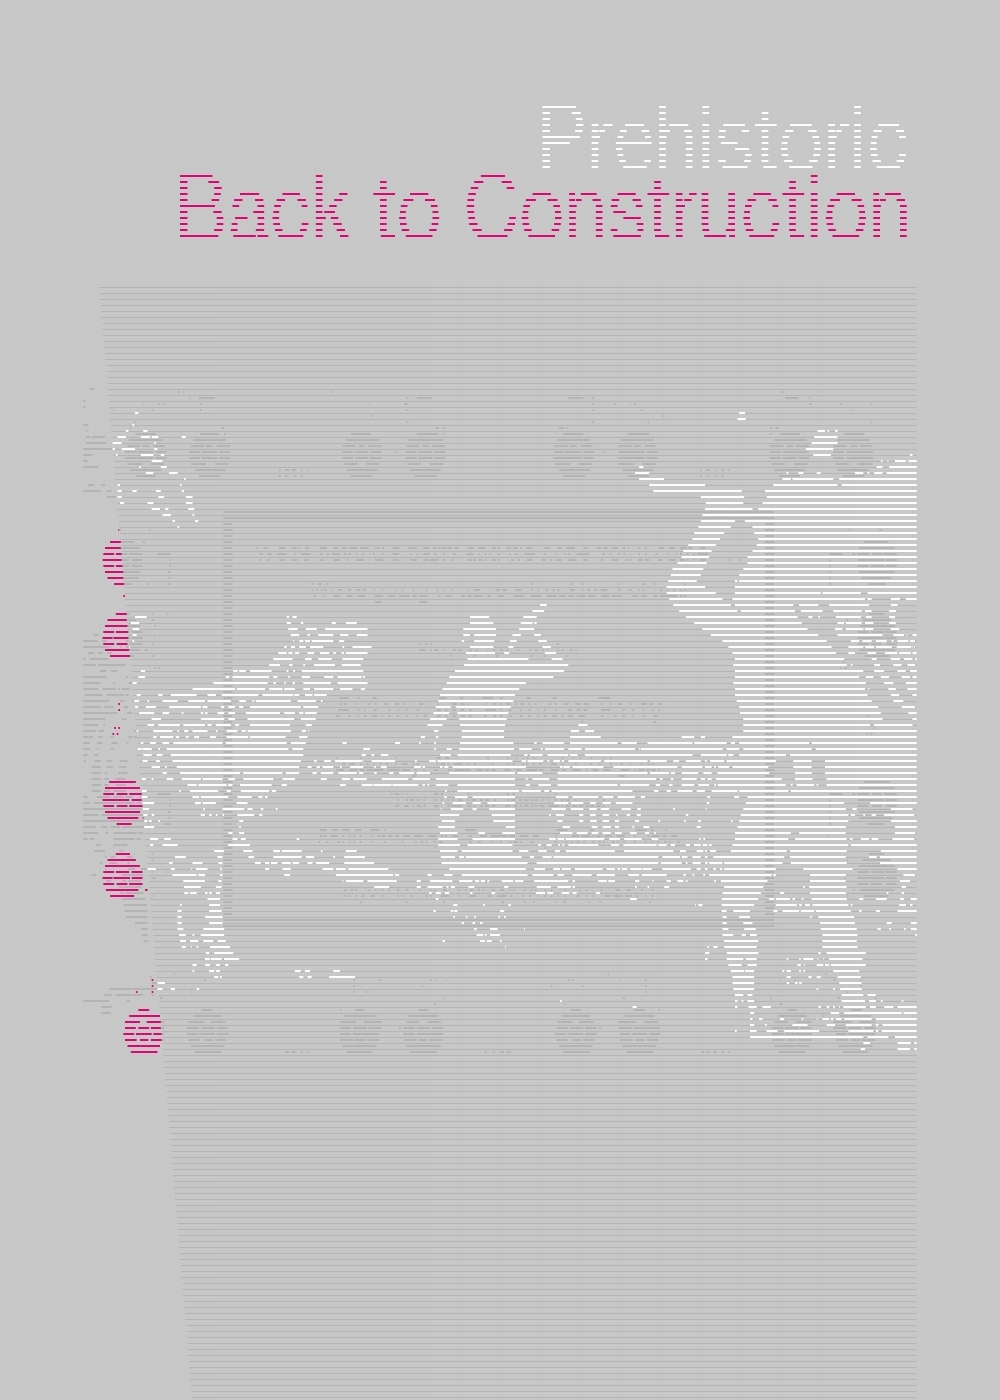 working title - prehistoric back to construction